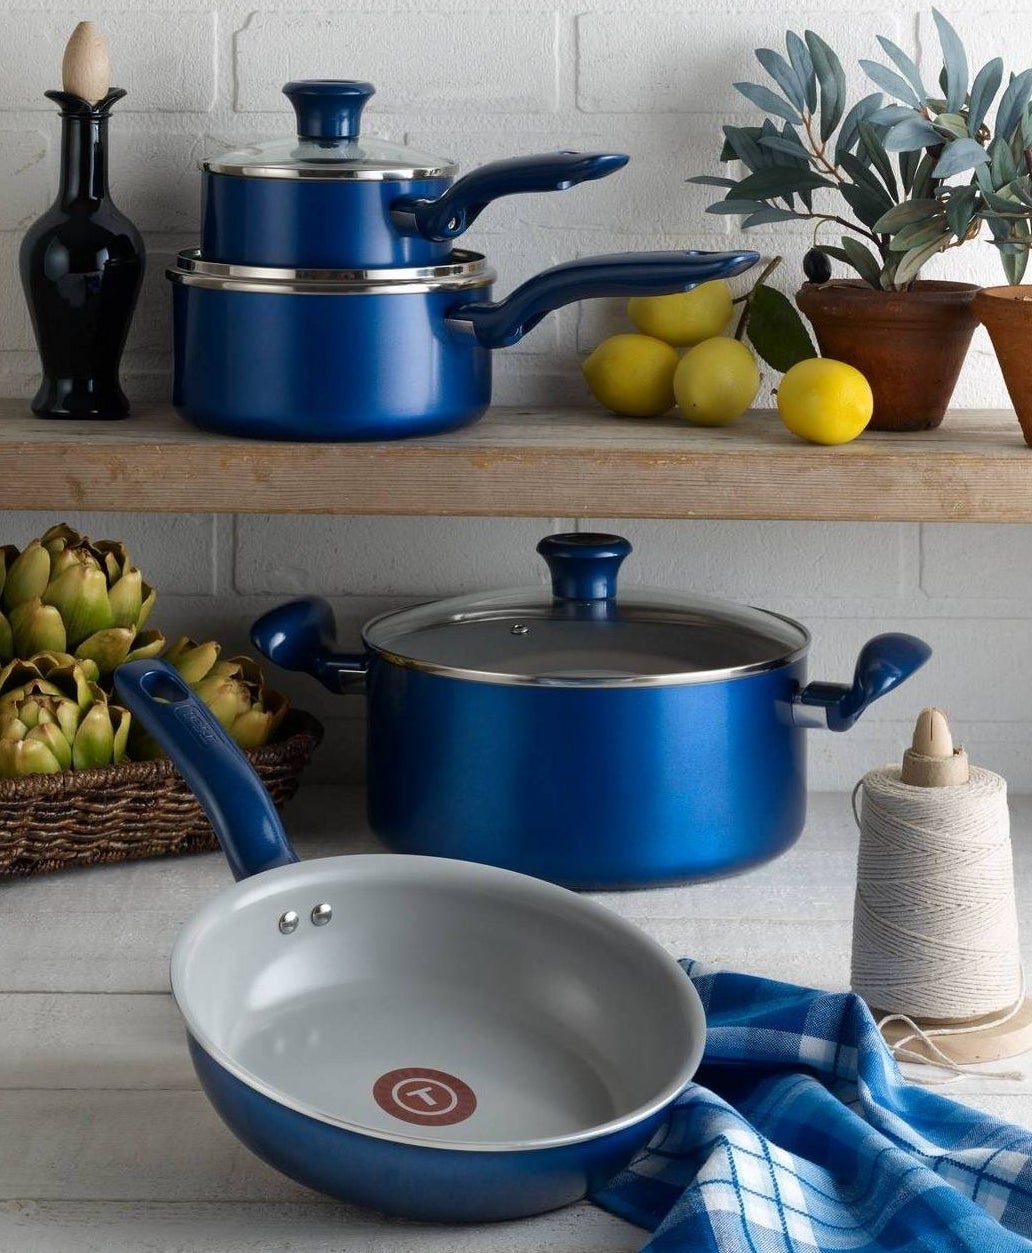 Four pieces of the cookware set are displayed in the kitchen